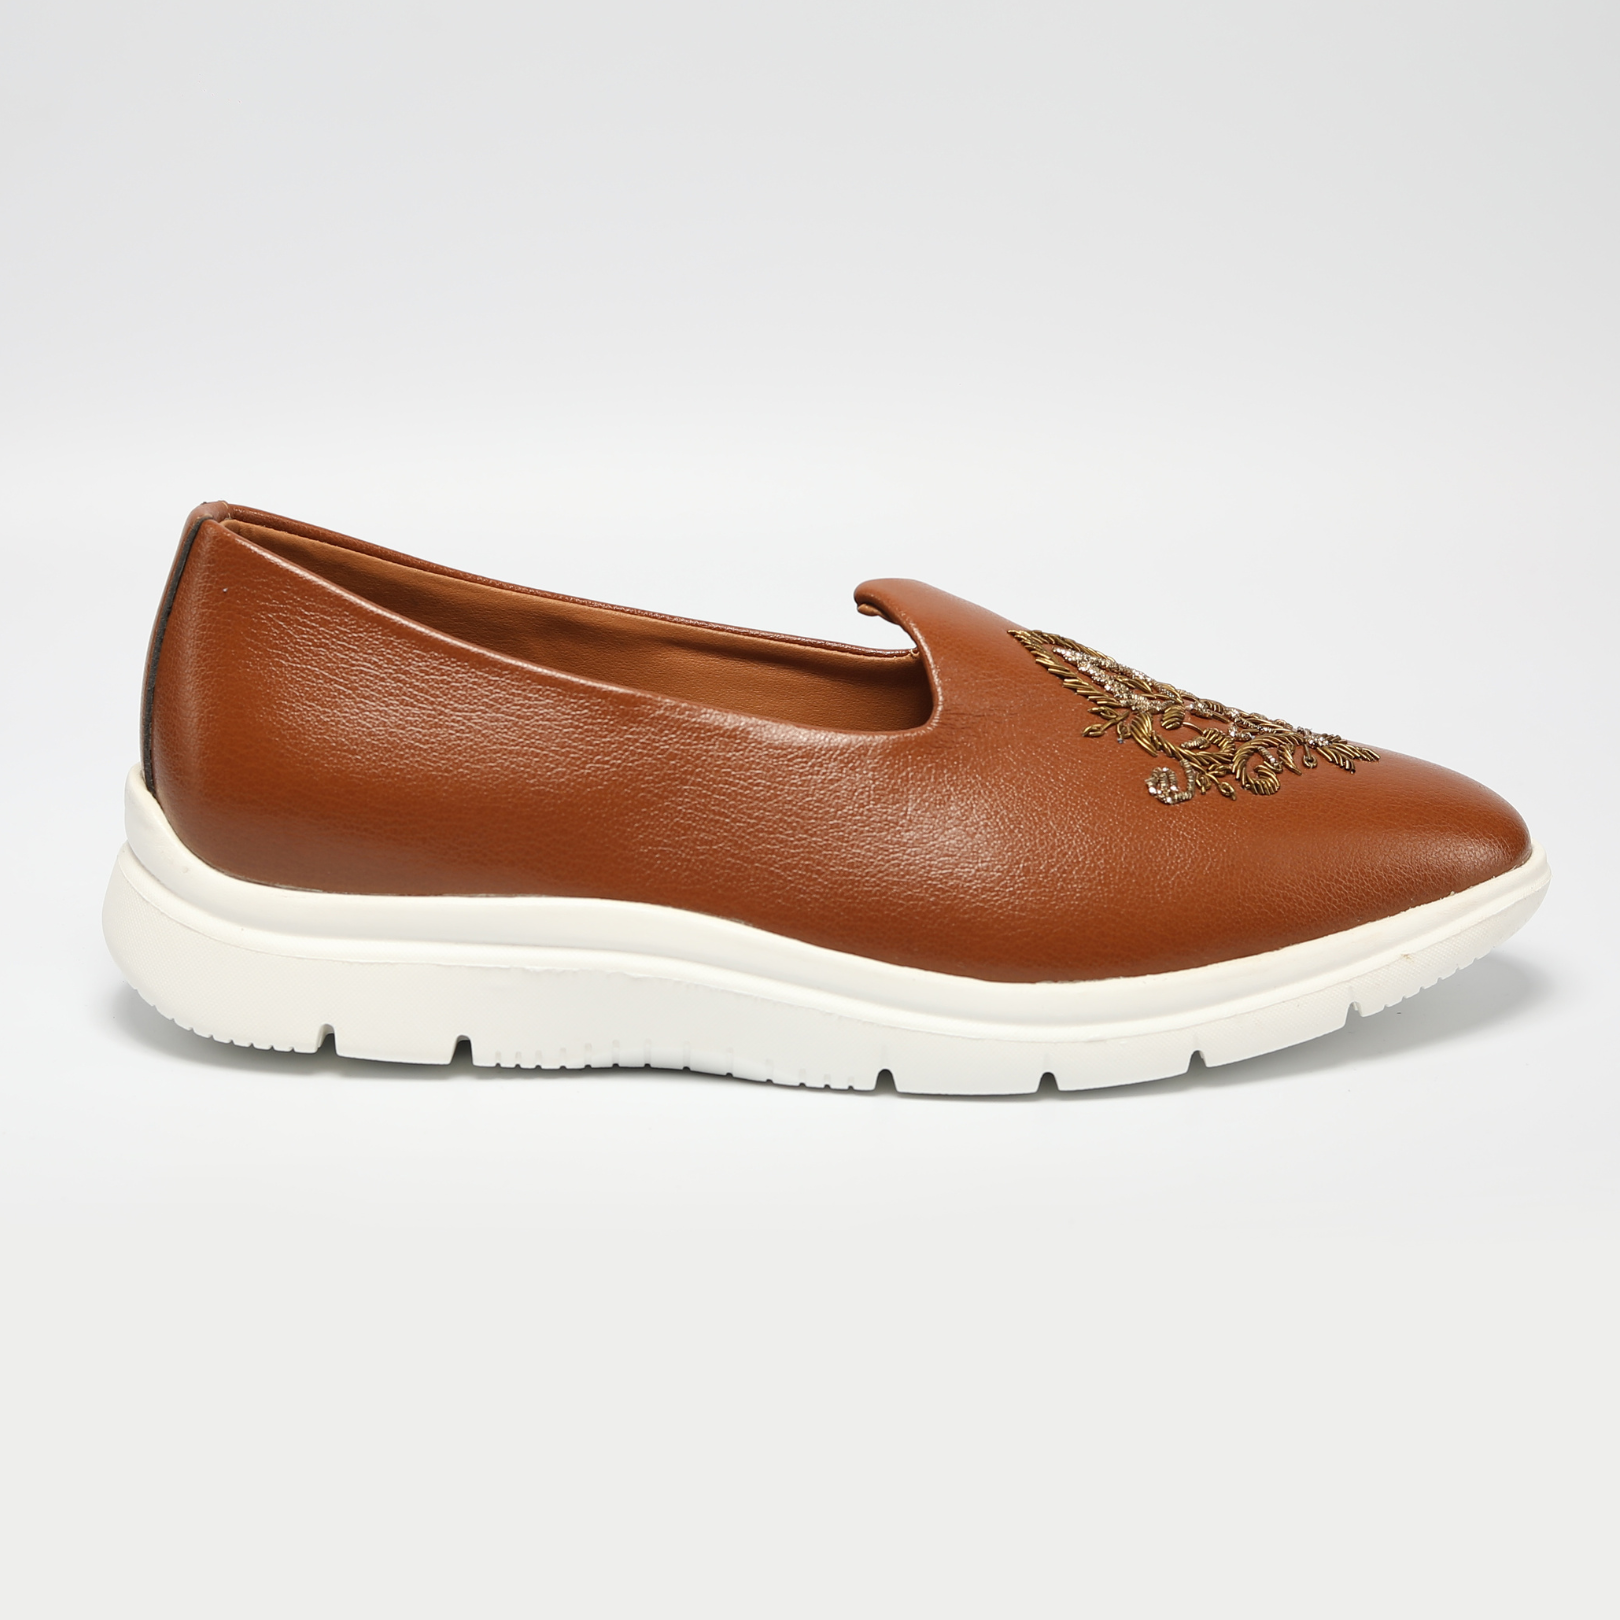 An ethnic design ReMx Mojari Sneakers - Tan with embroidered detailing, perfect for a festive occasion by Monkstory.